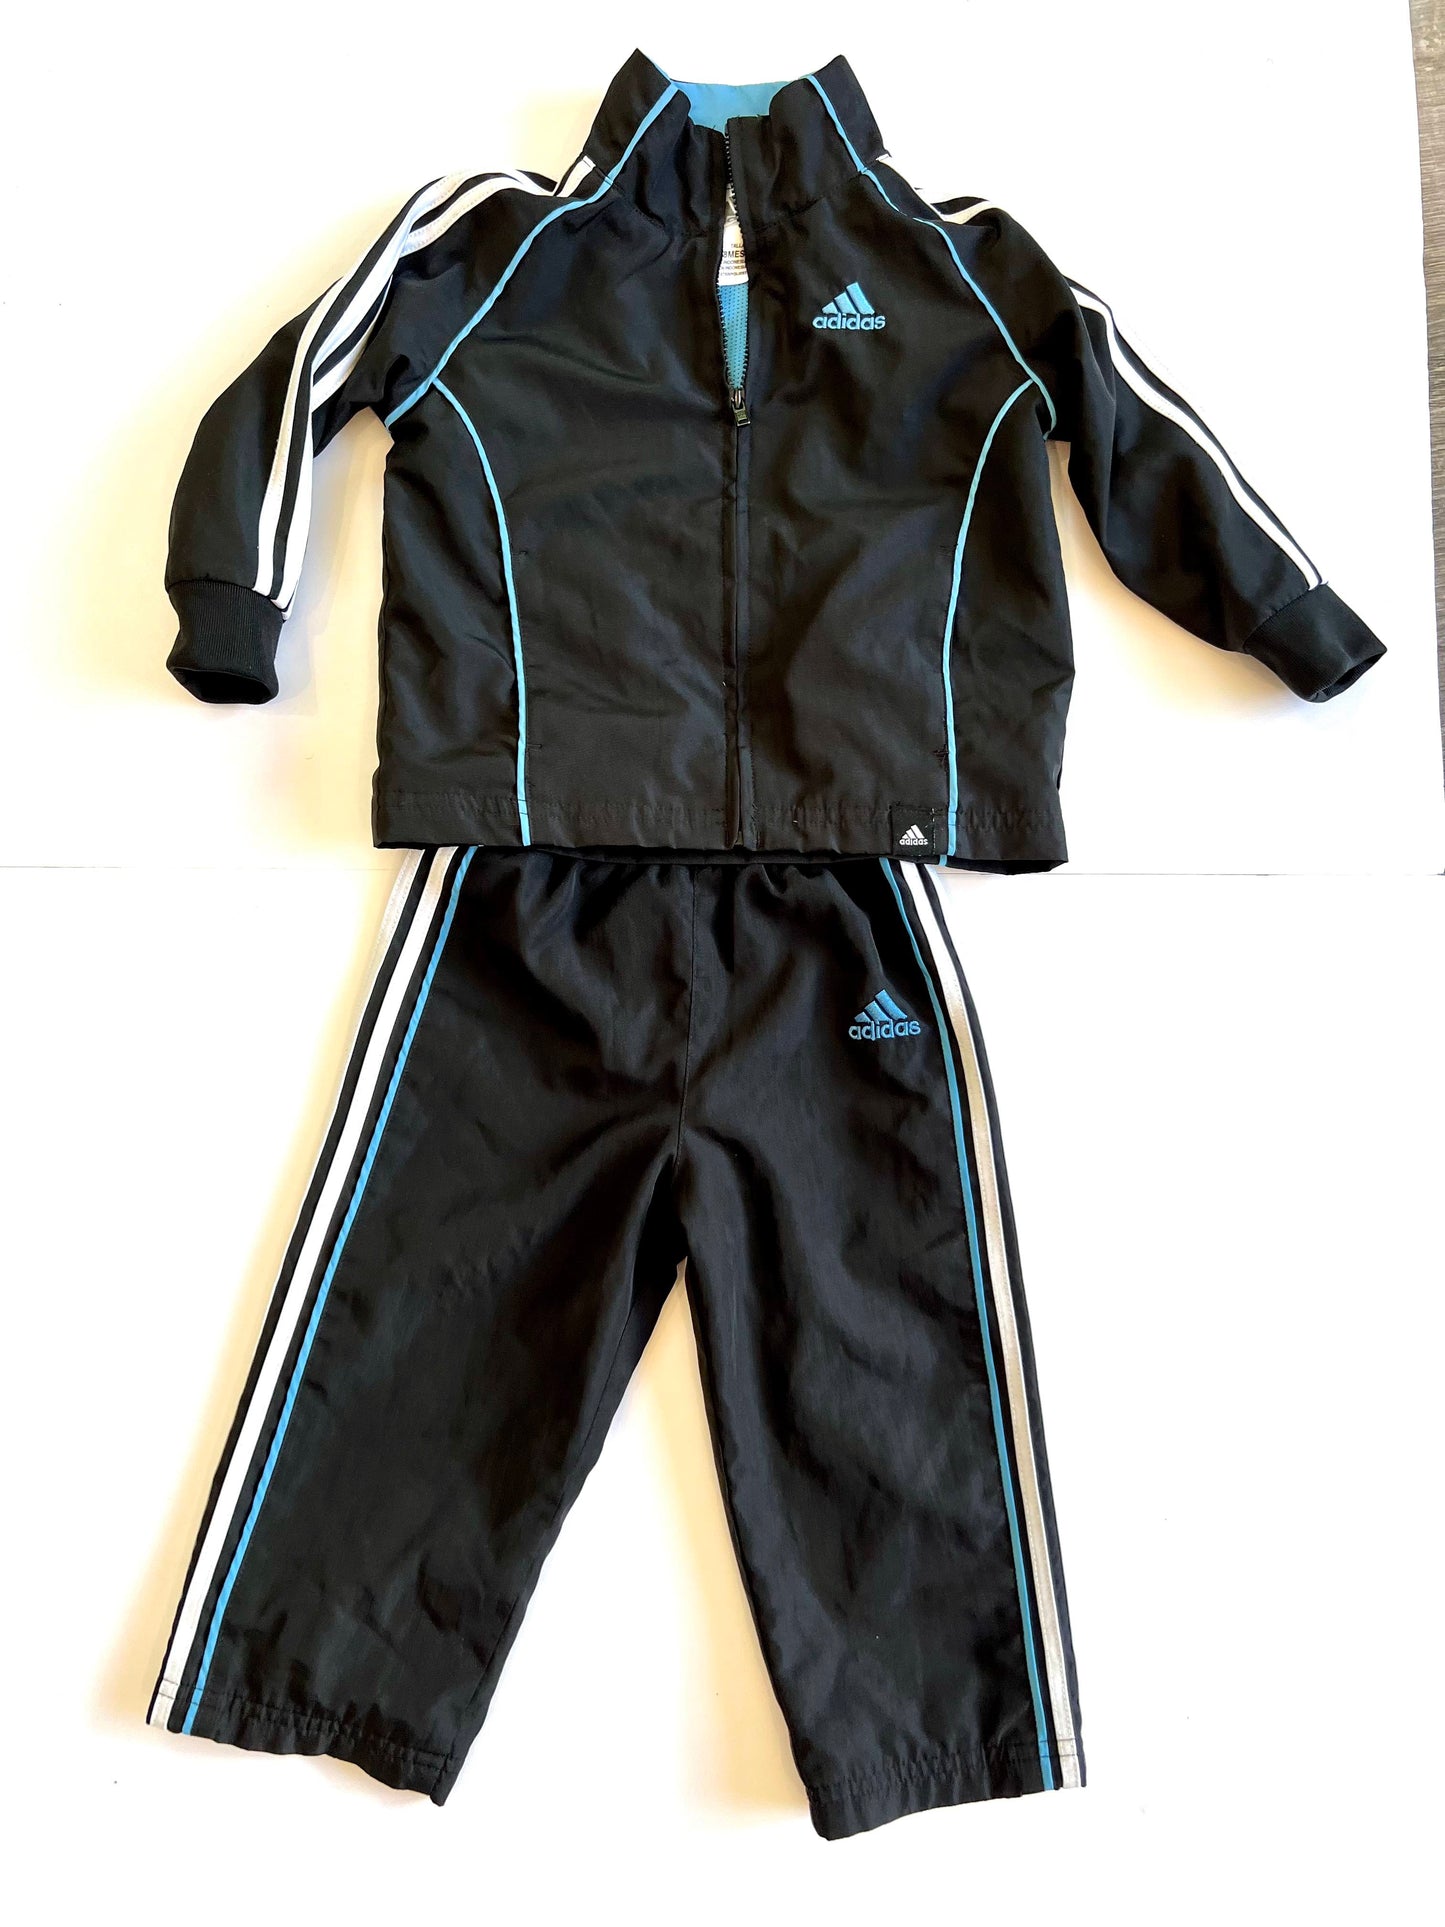 18 Mo Adidas Athletic Outfit with lined pants and jacket Black and Blue - Excellent Condition (EC)